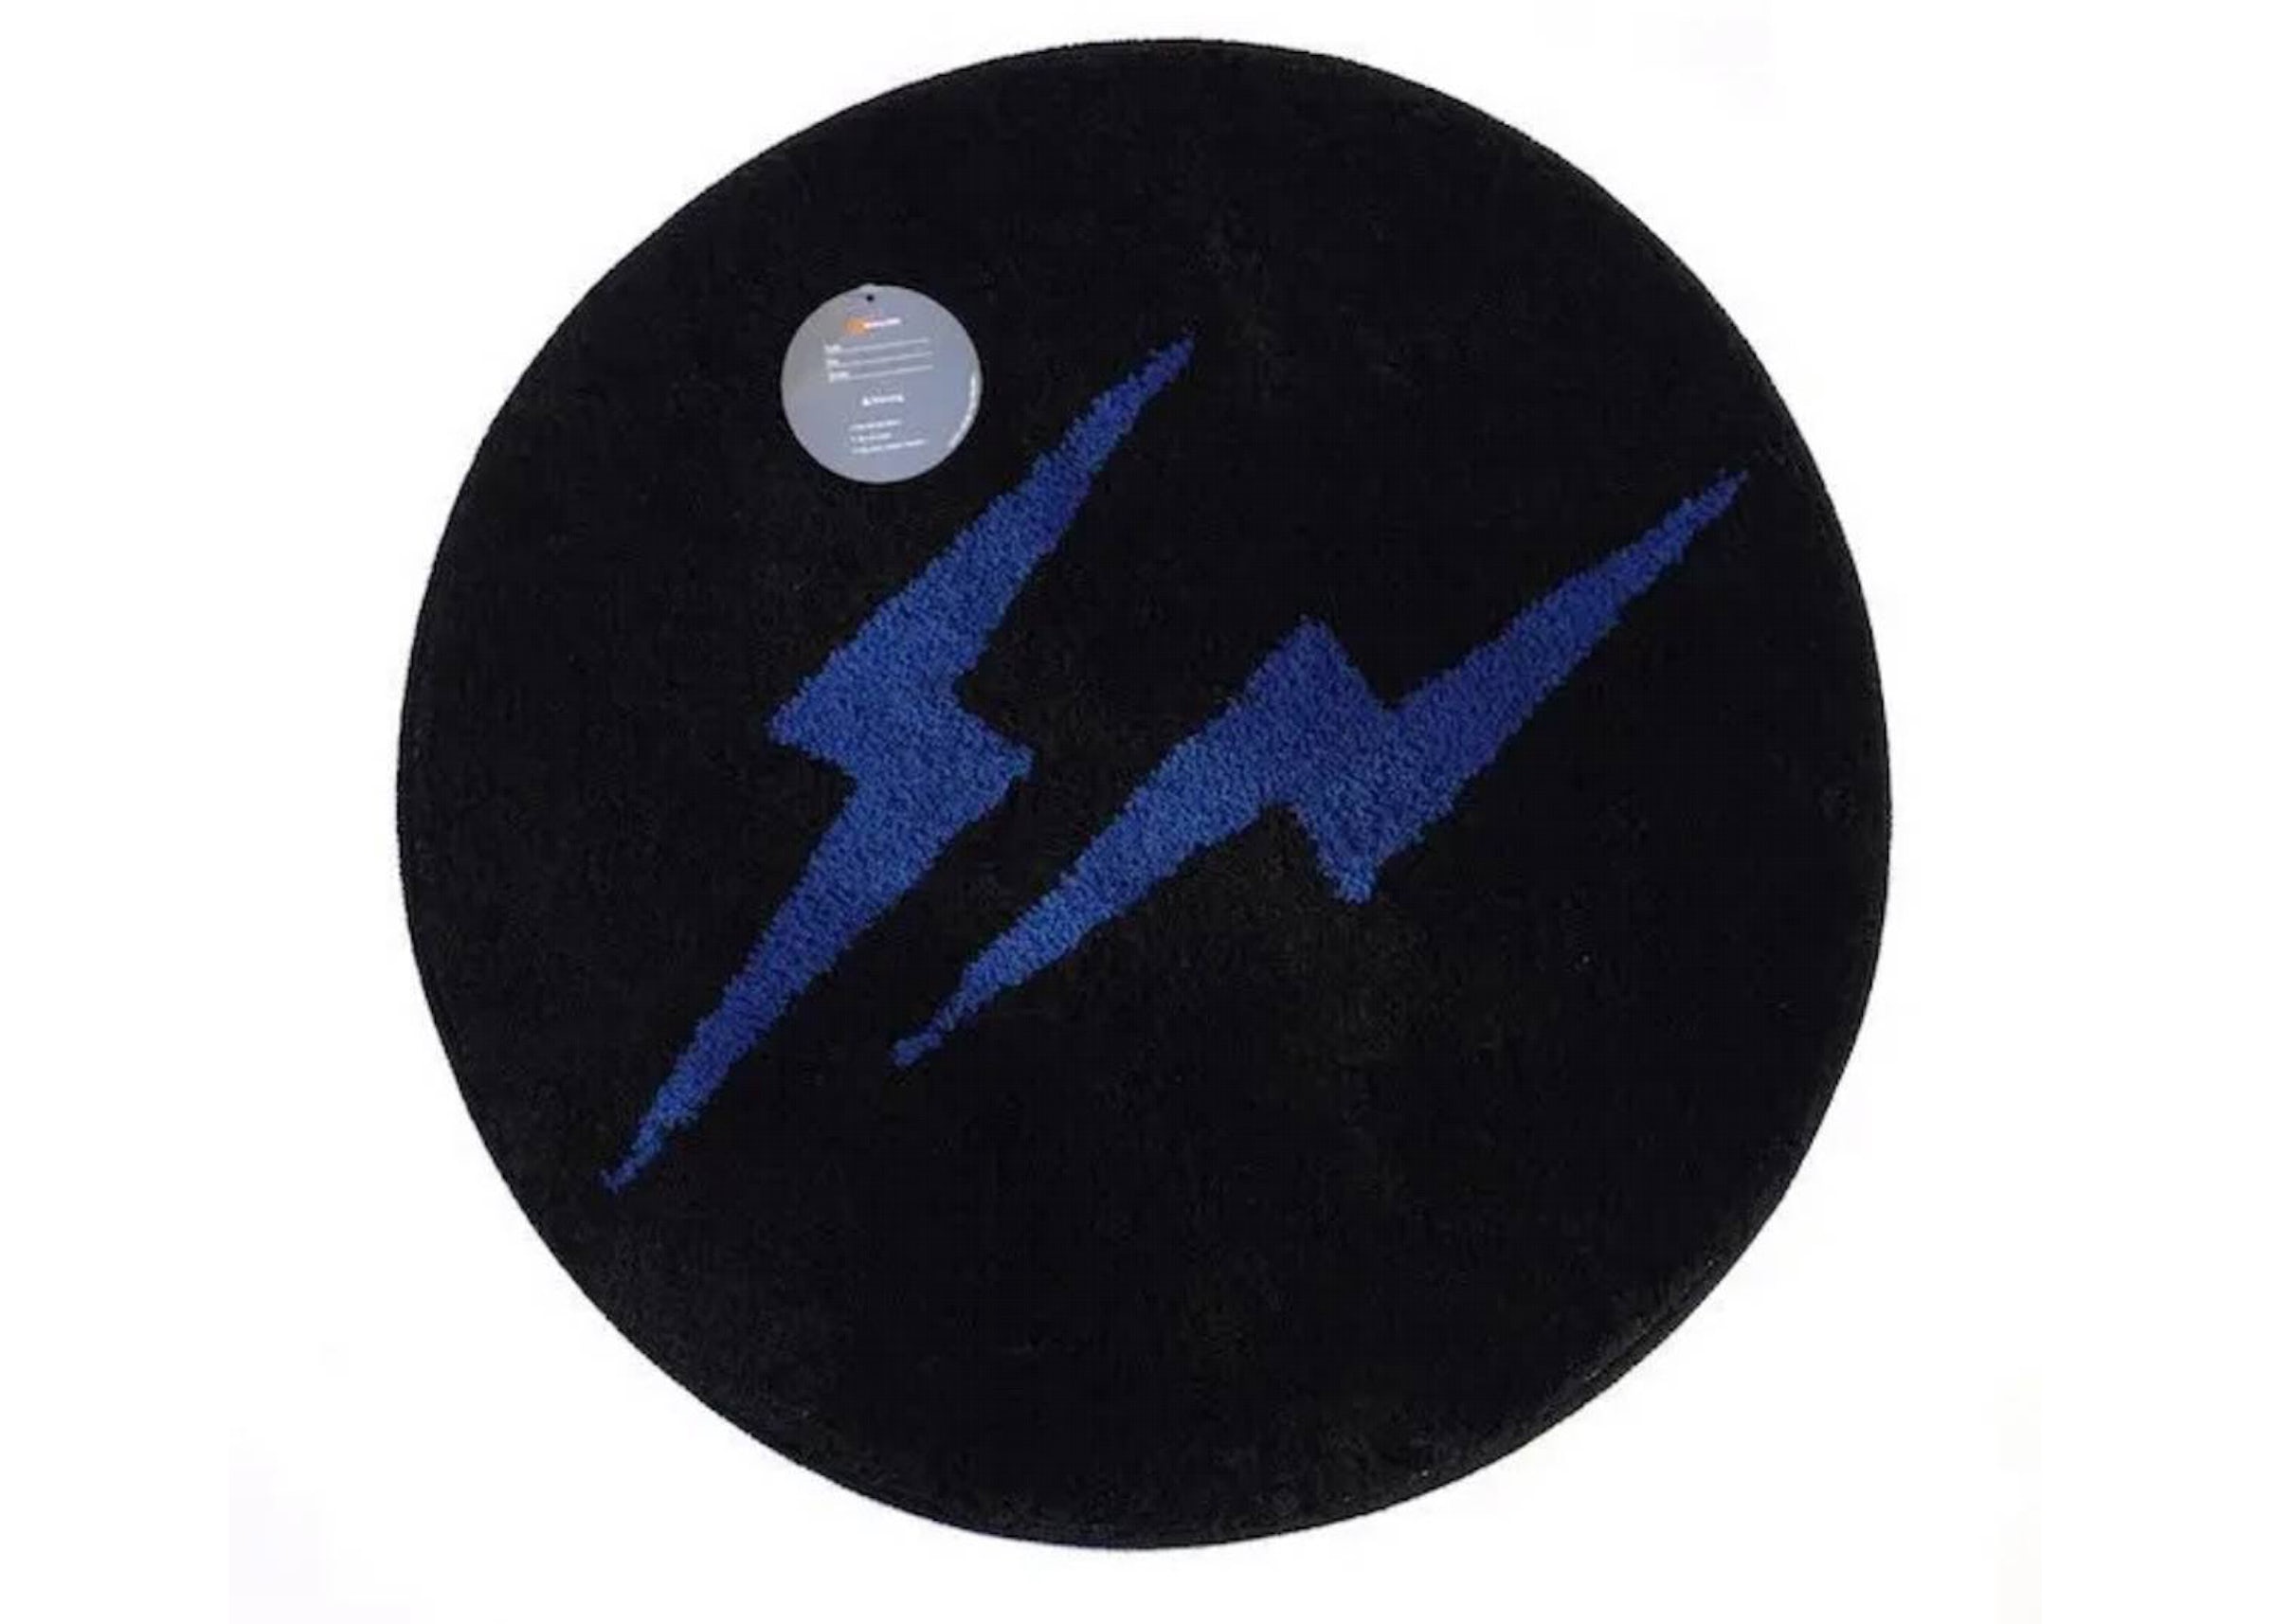 Fragment Design x Gallery 1950 Small Rug Black/Blue - SS21 - US